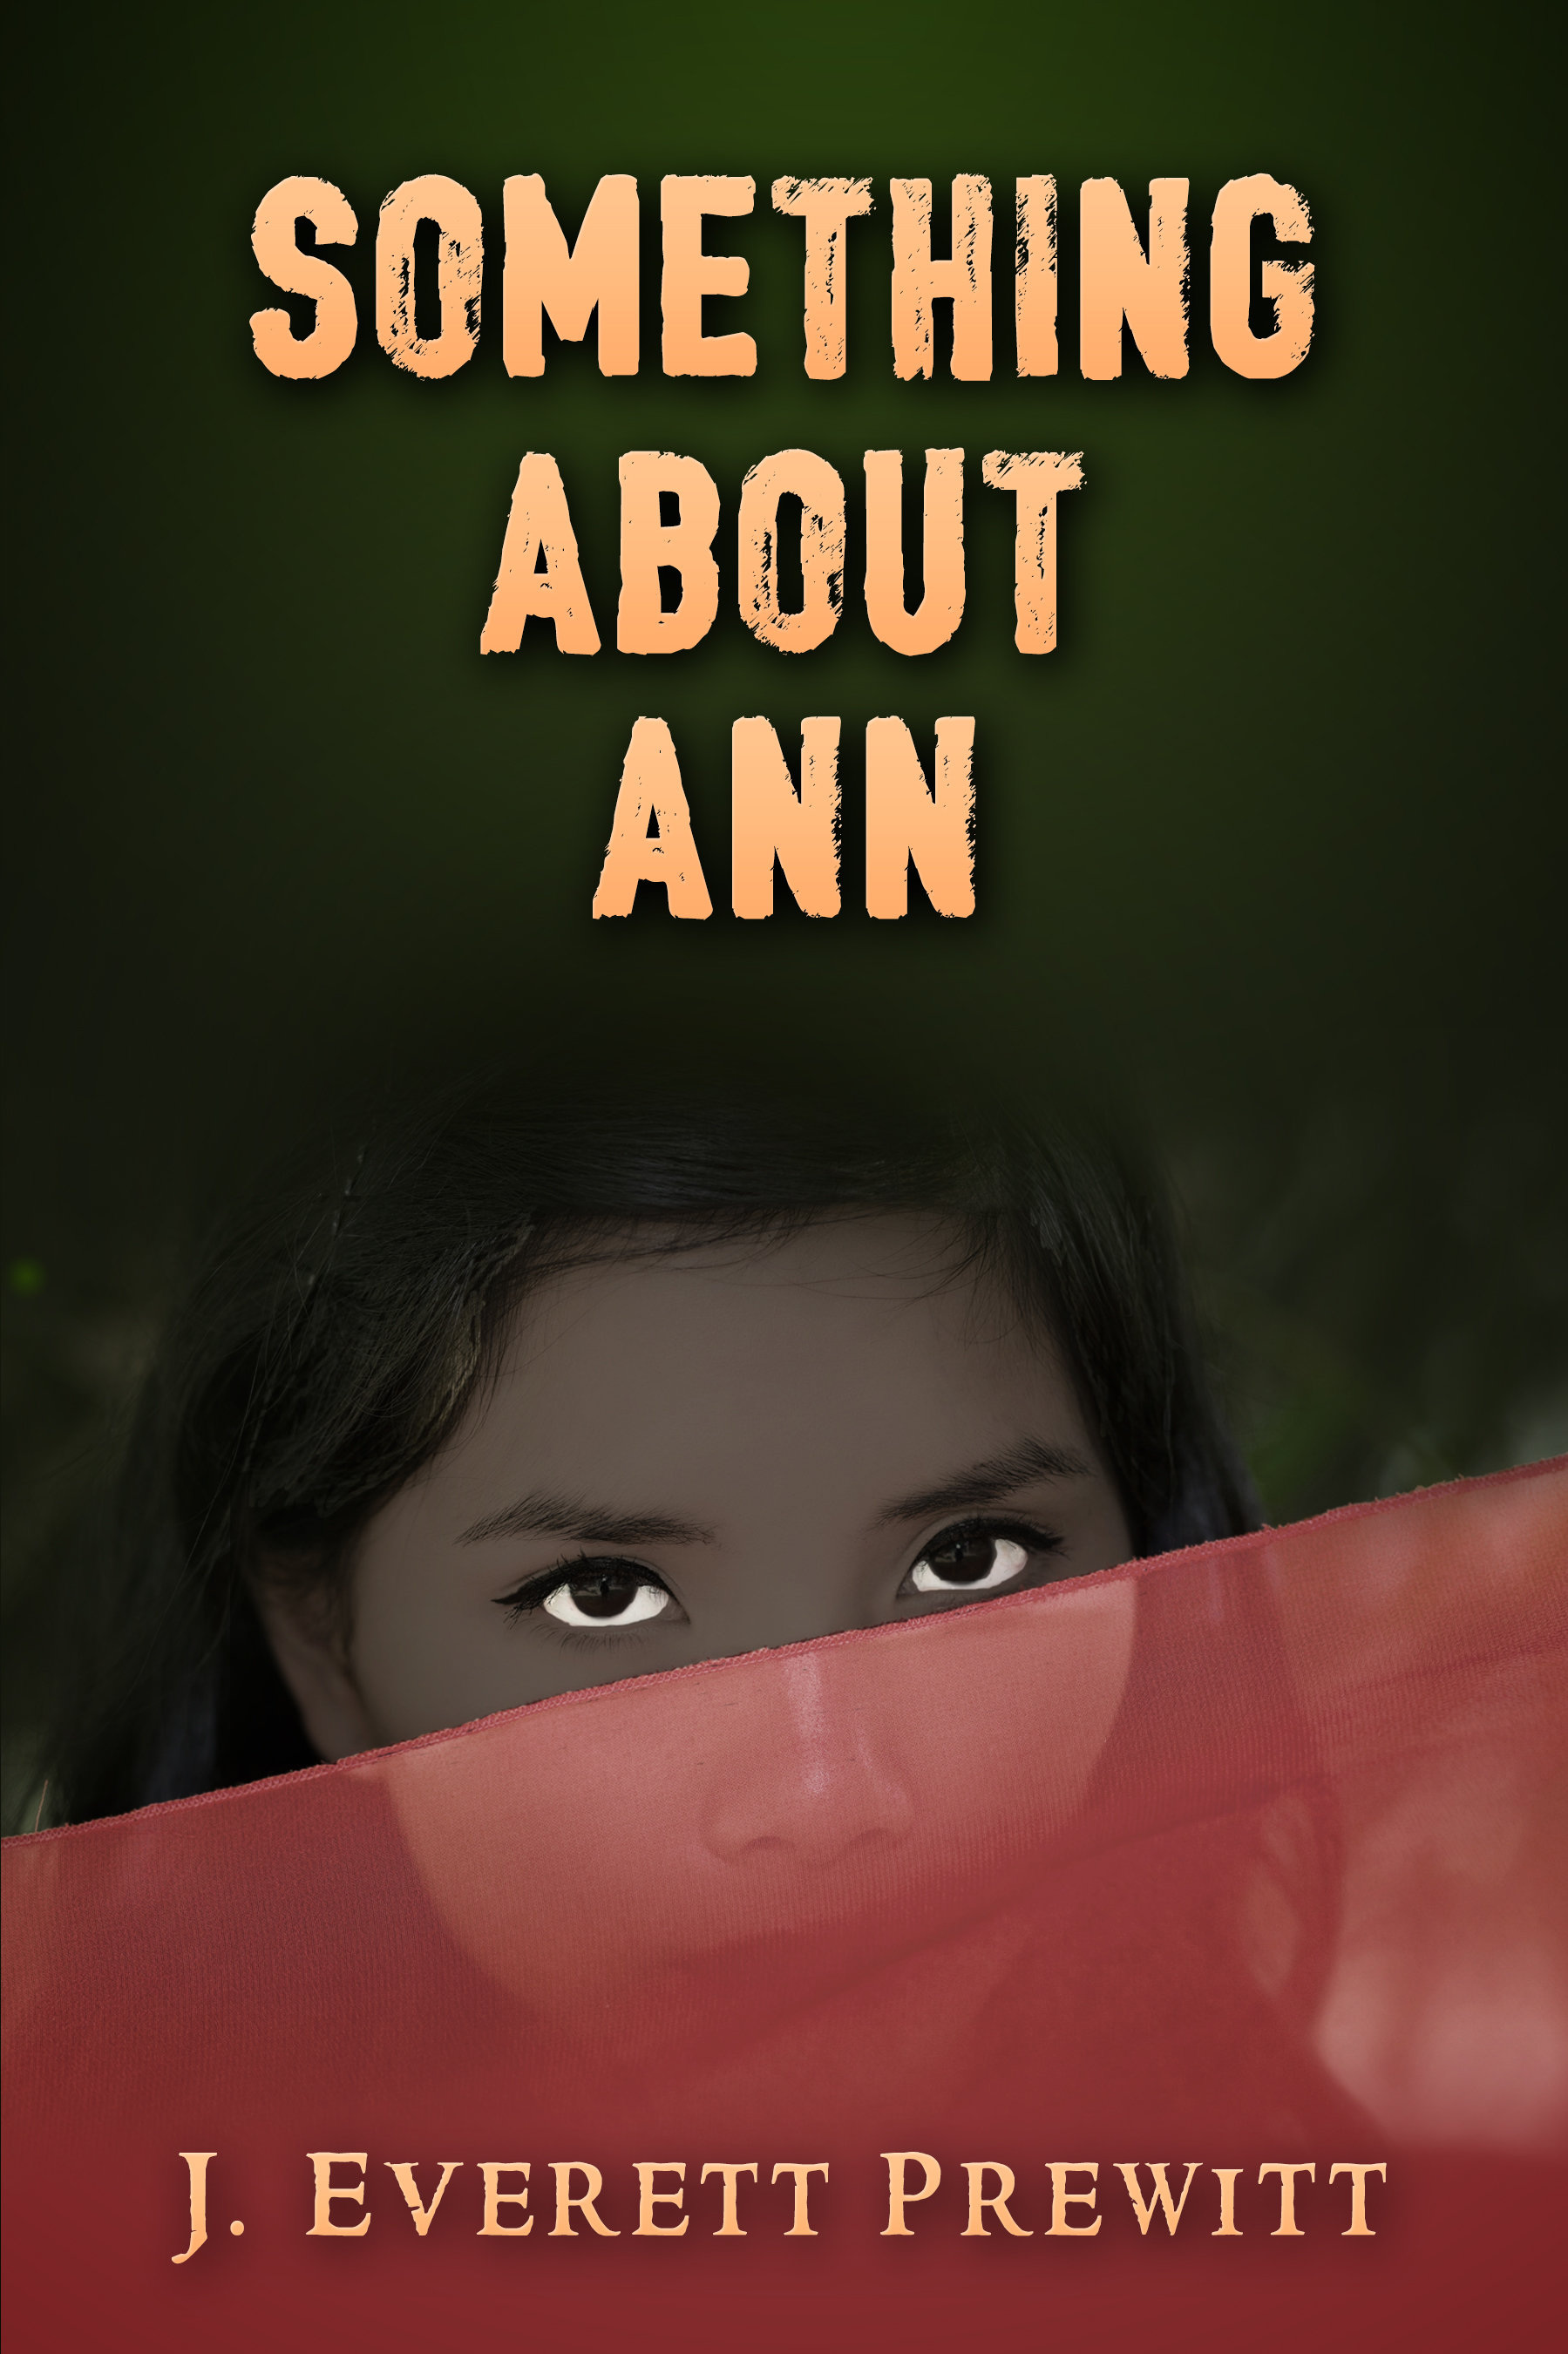 Something About Ann: Stories of Love and Brotherhood